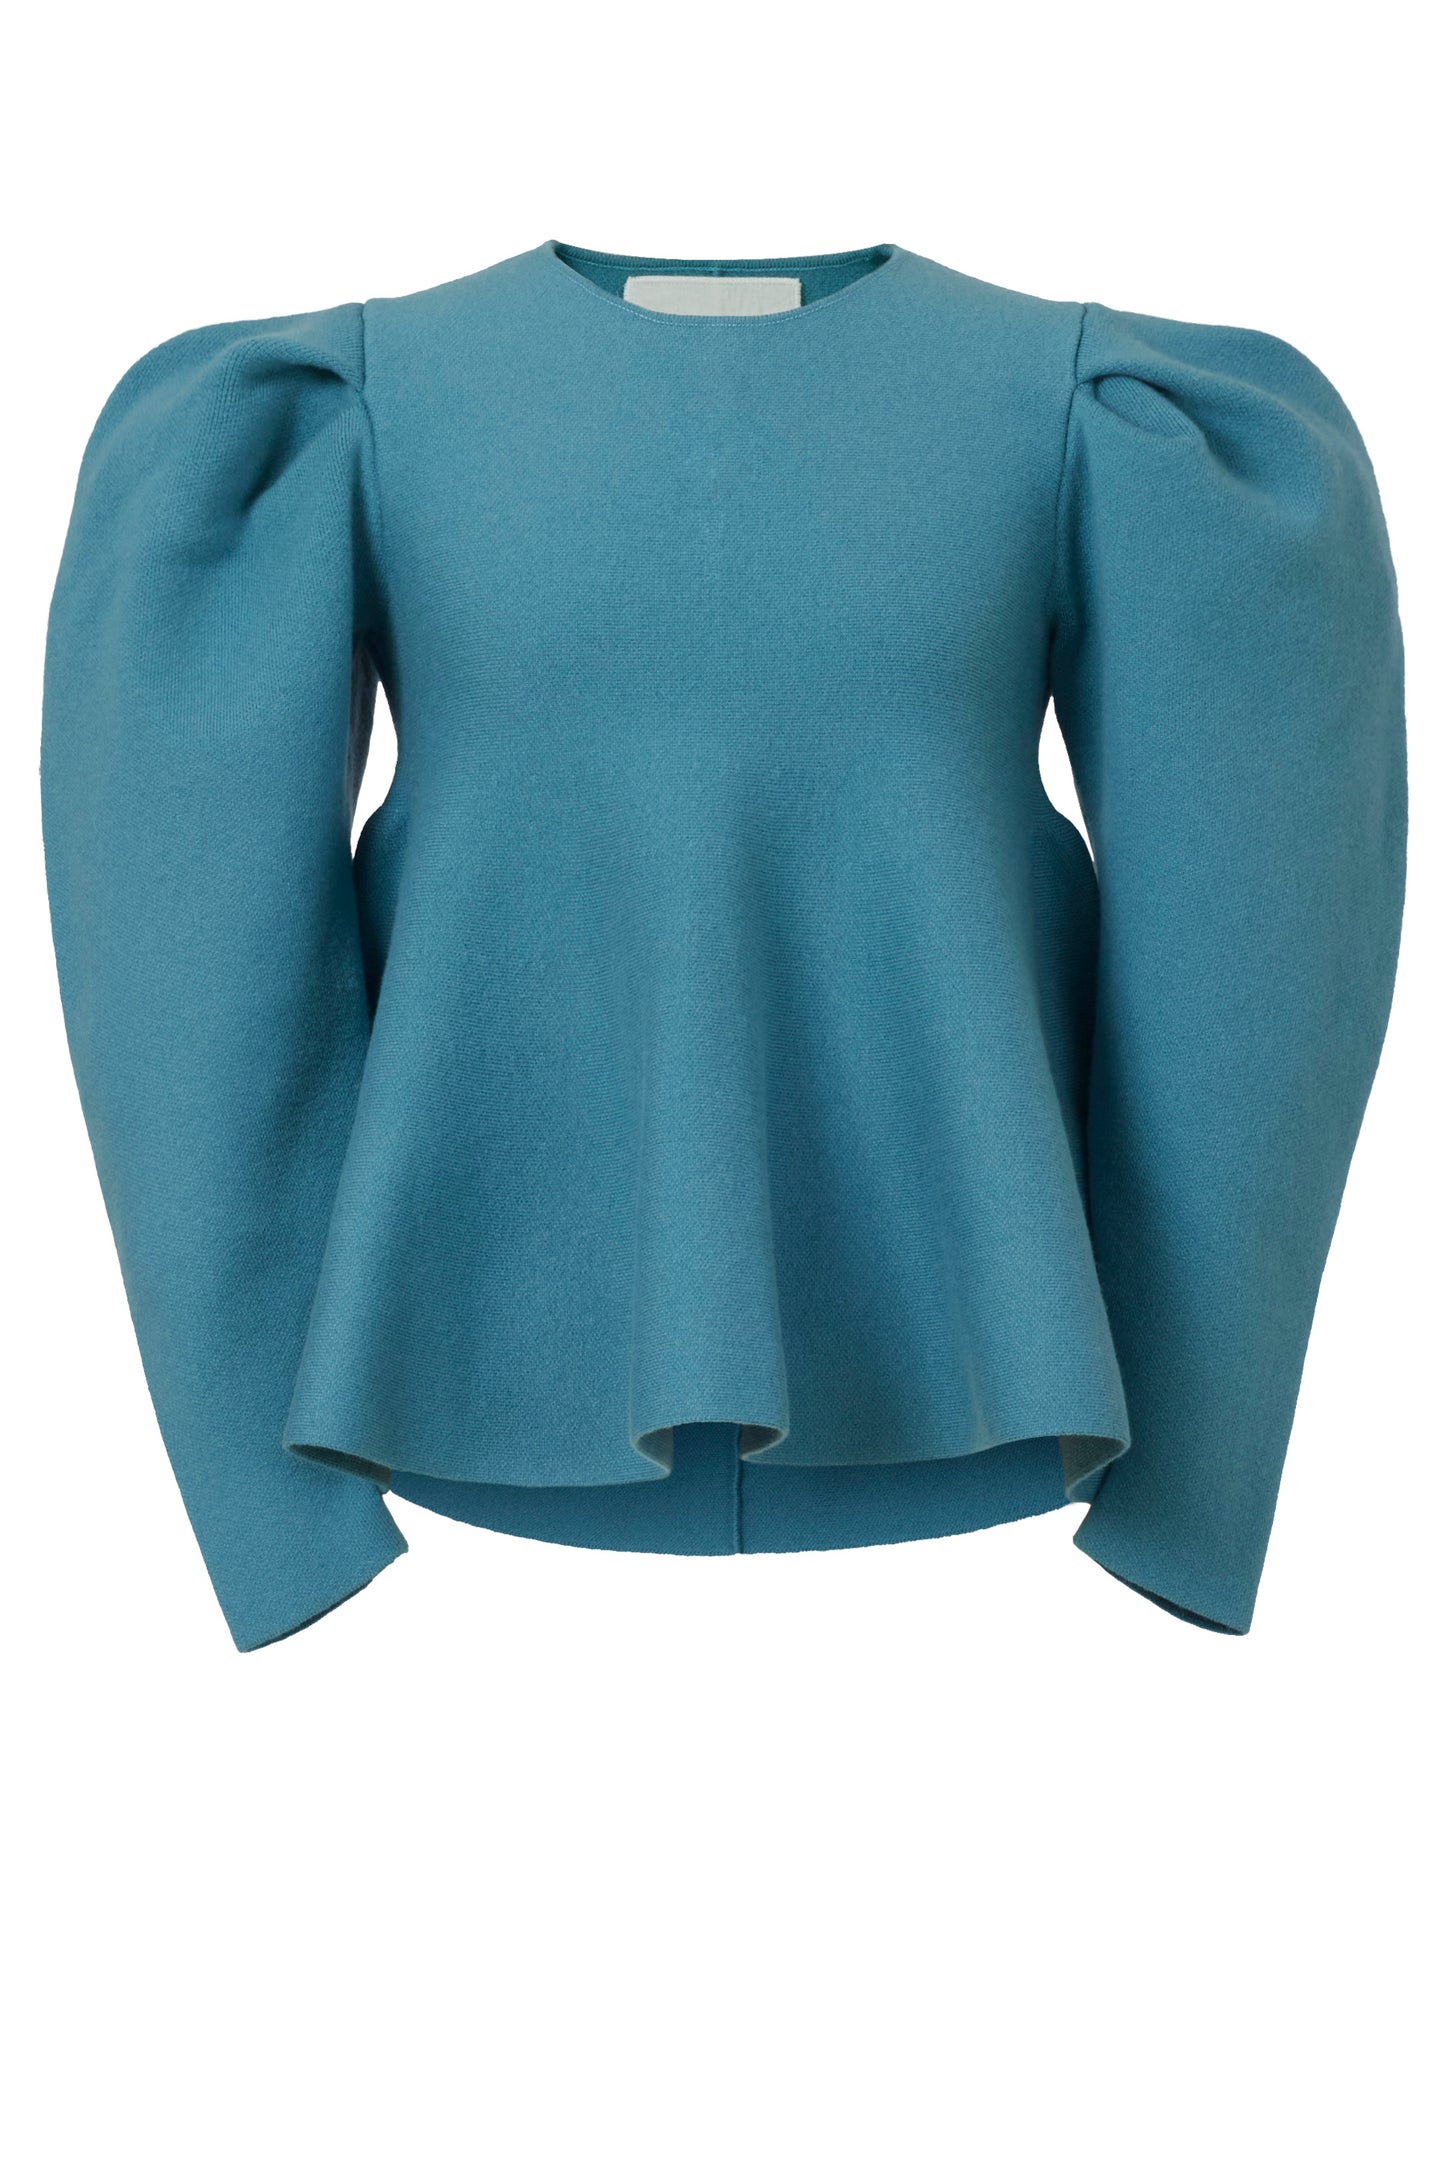 Wool Cashmere Fit and Flare Top | Peacock